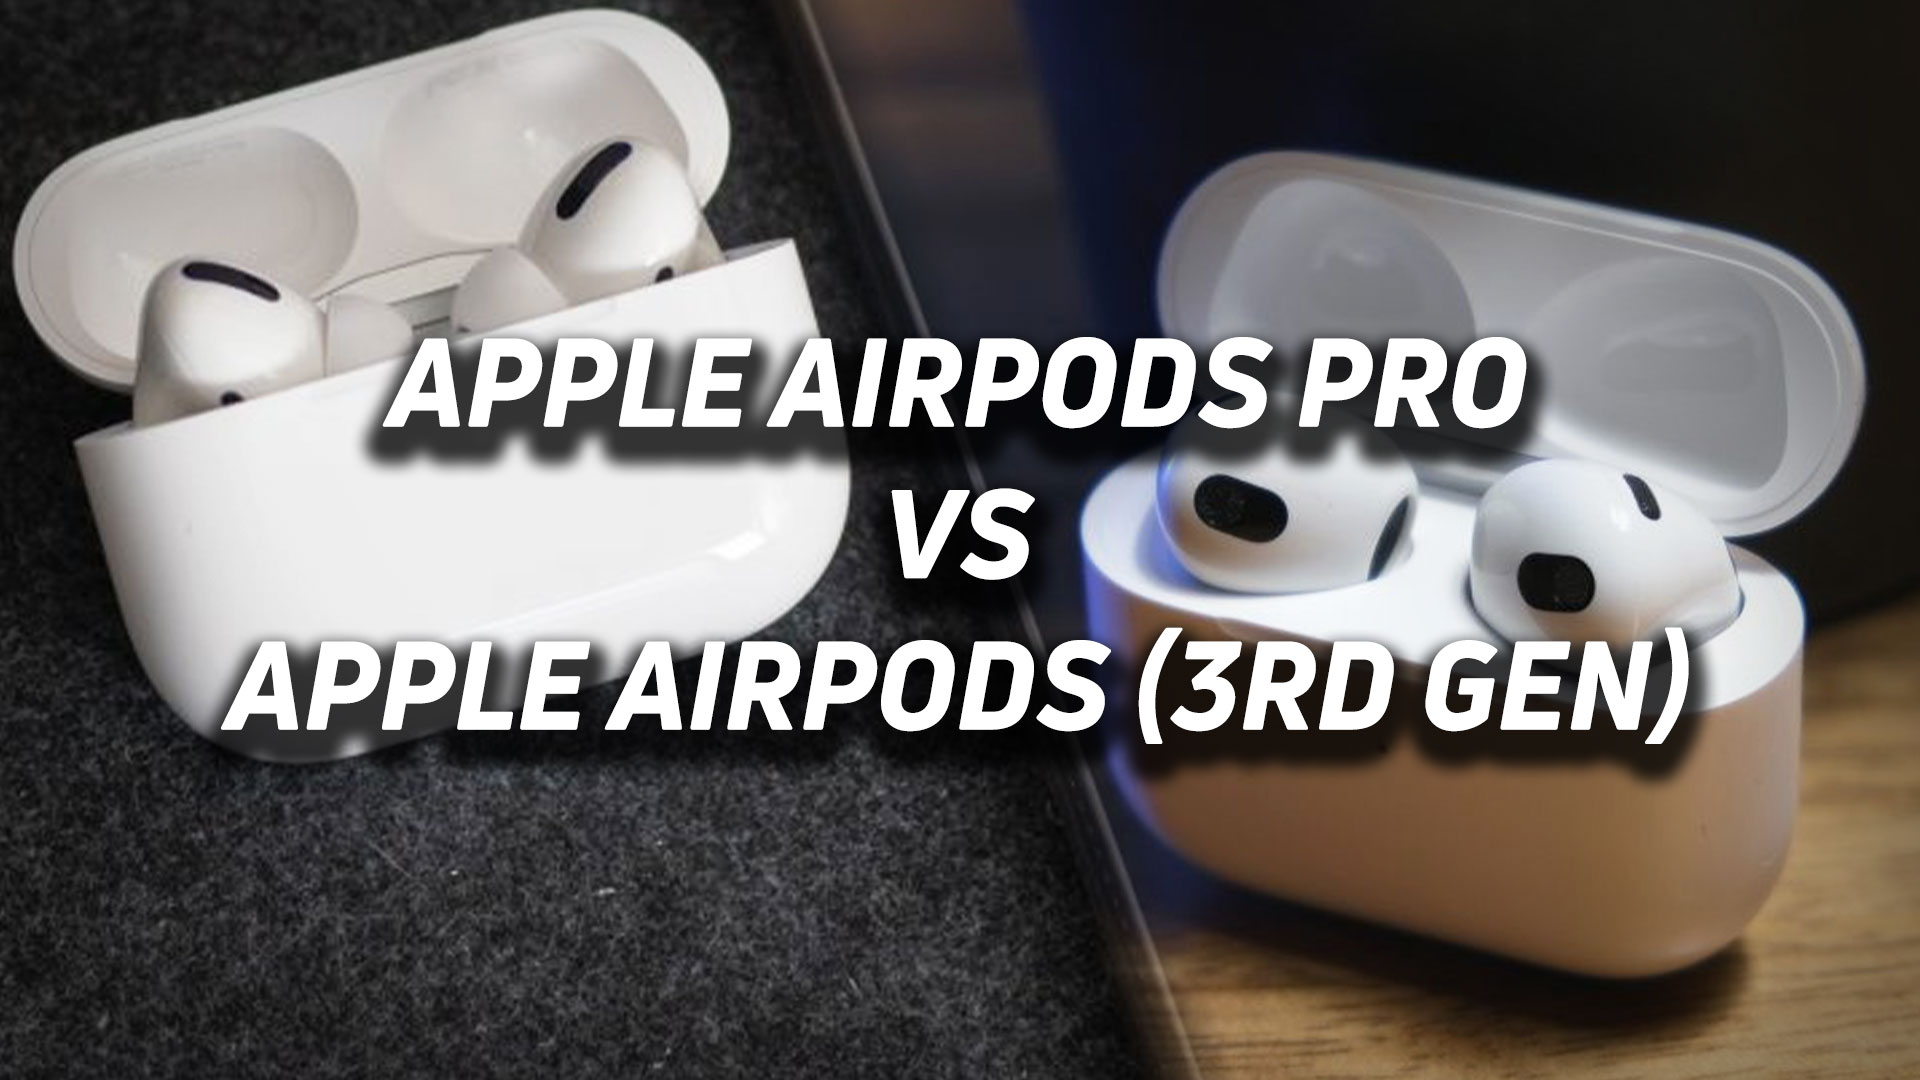 Apple AirPods Pro vs Apple AirPods (3rd generation) - SoundGuys